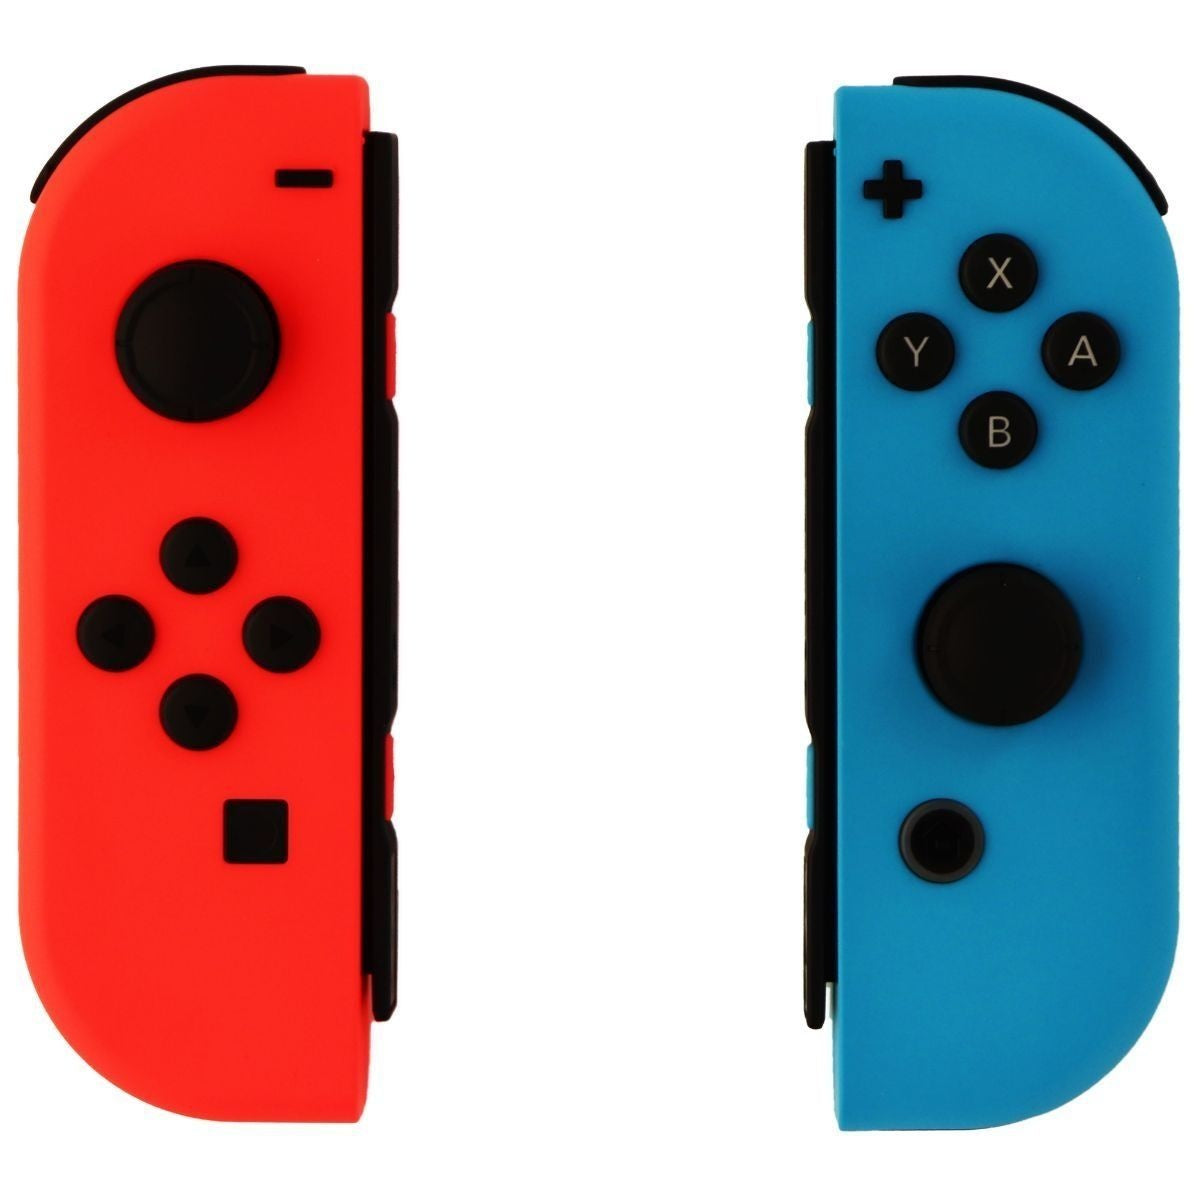 Nintendo Switch Joy-Cons (L/R) - Left Neon Red / Right Neon Blue Controllers